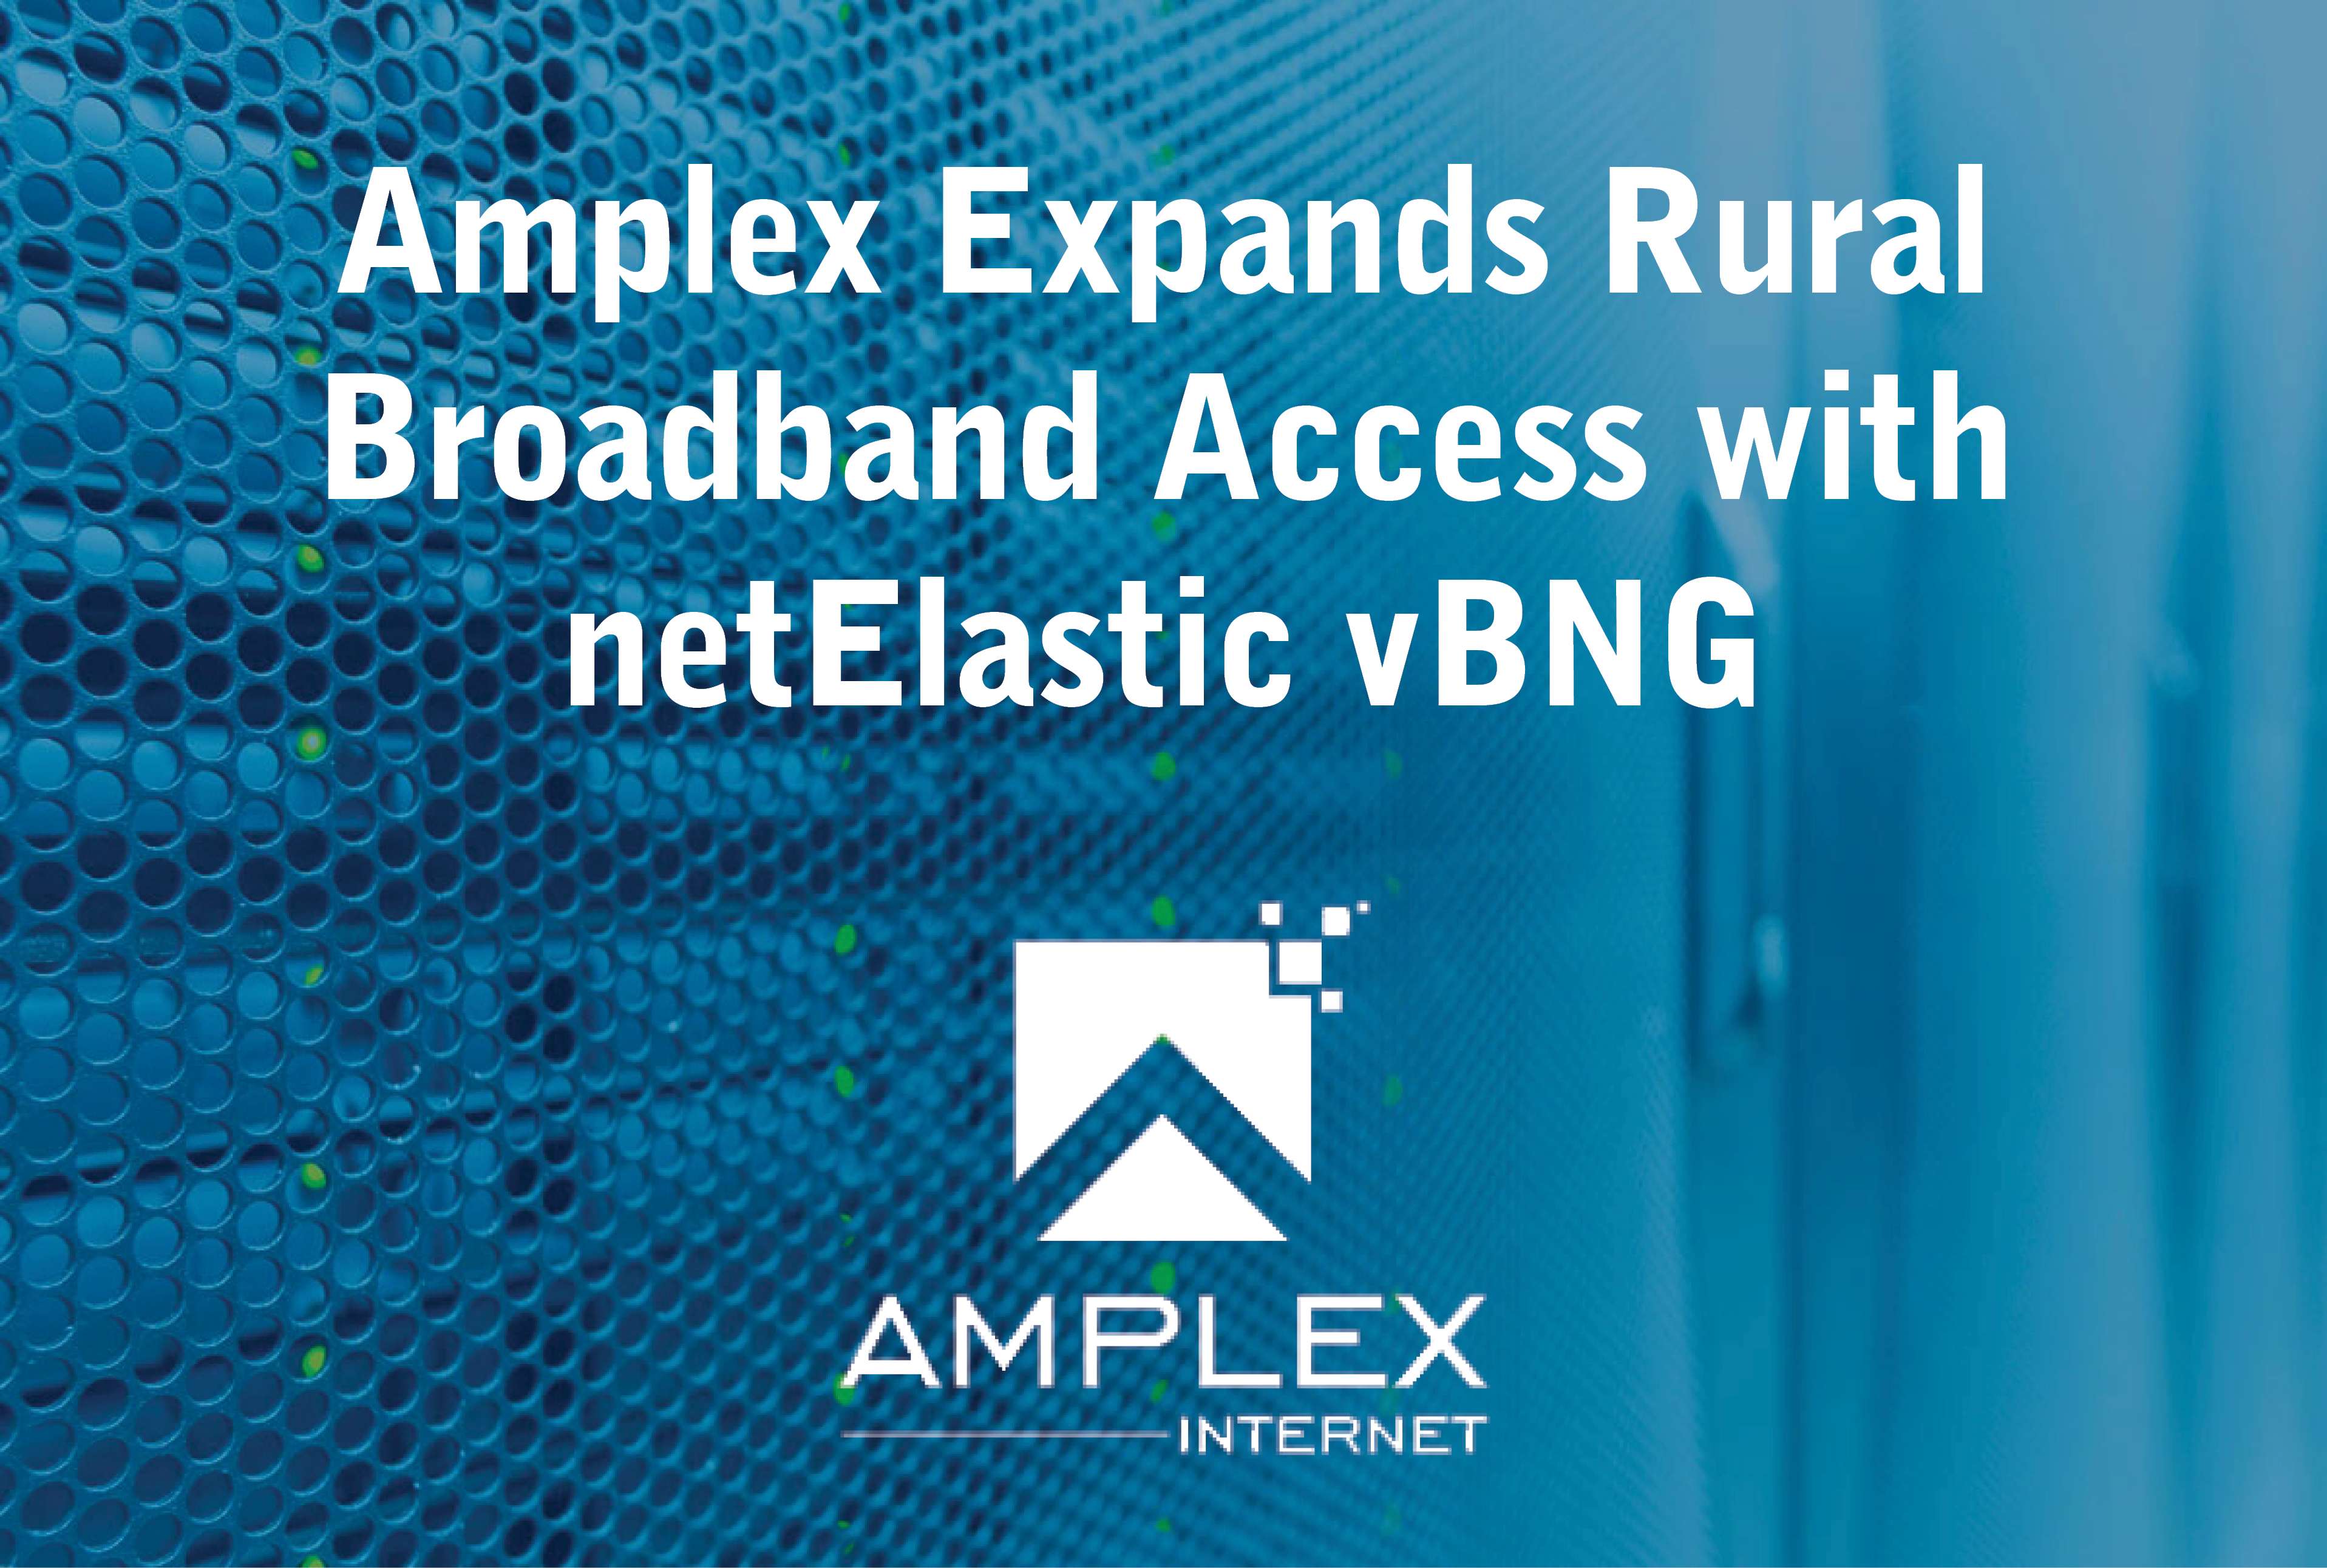 Amplex Expands Rural Broadband Access with netElastic vBNG